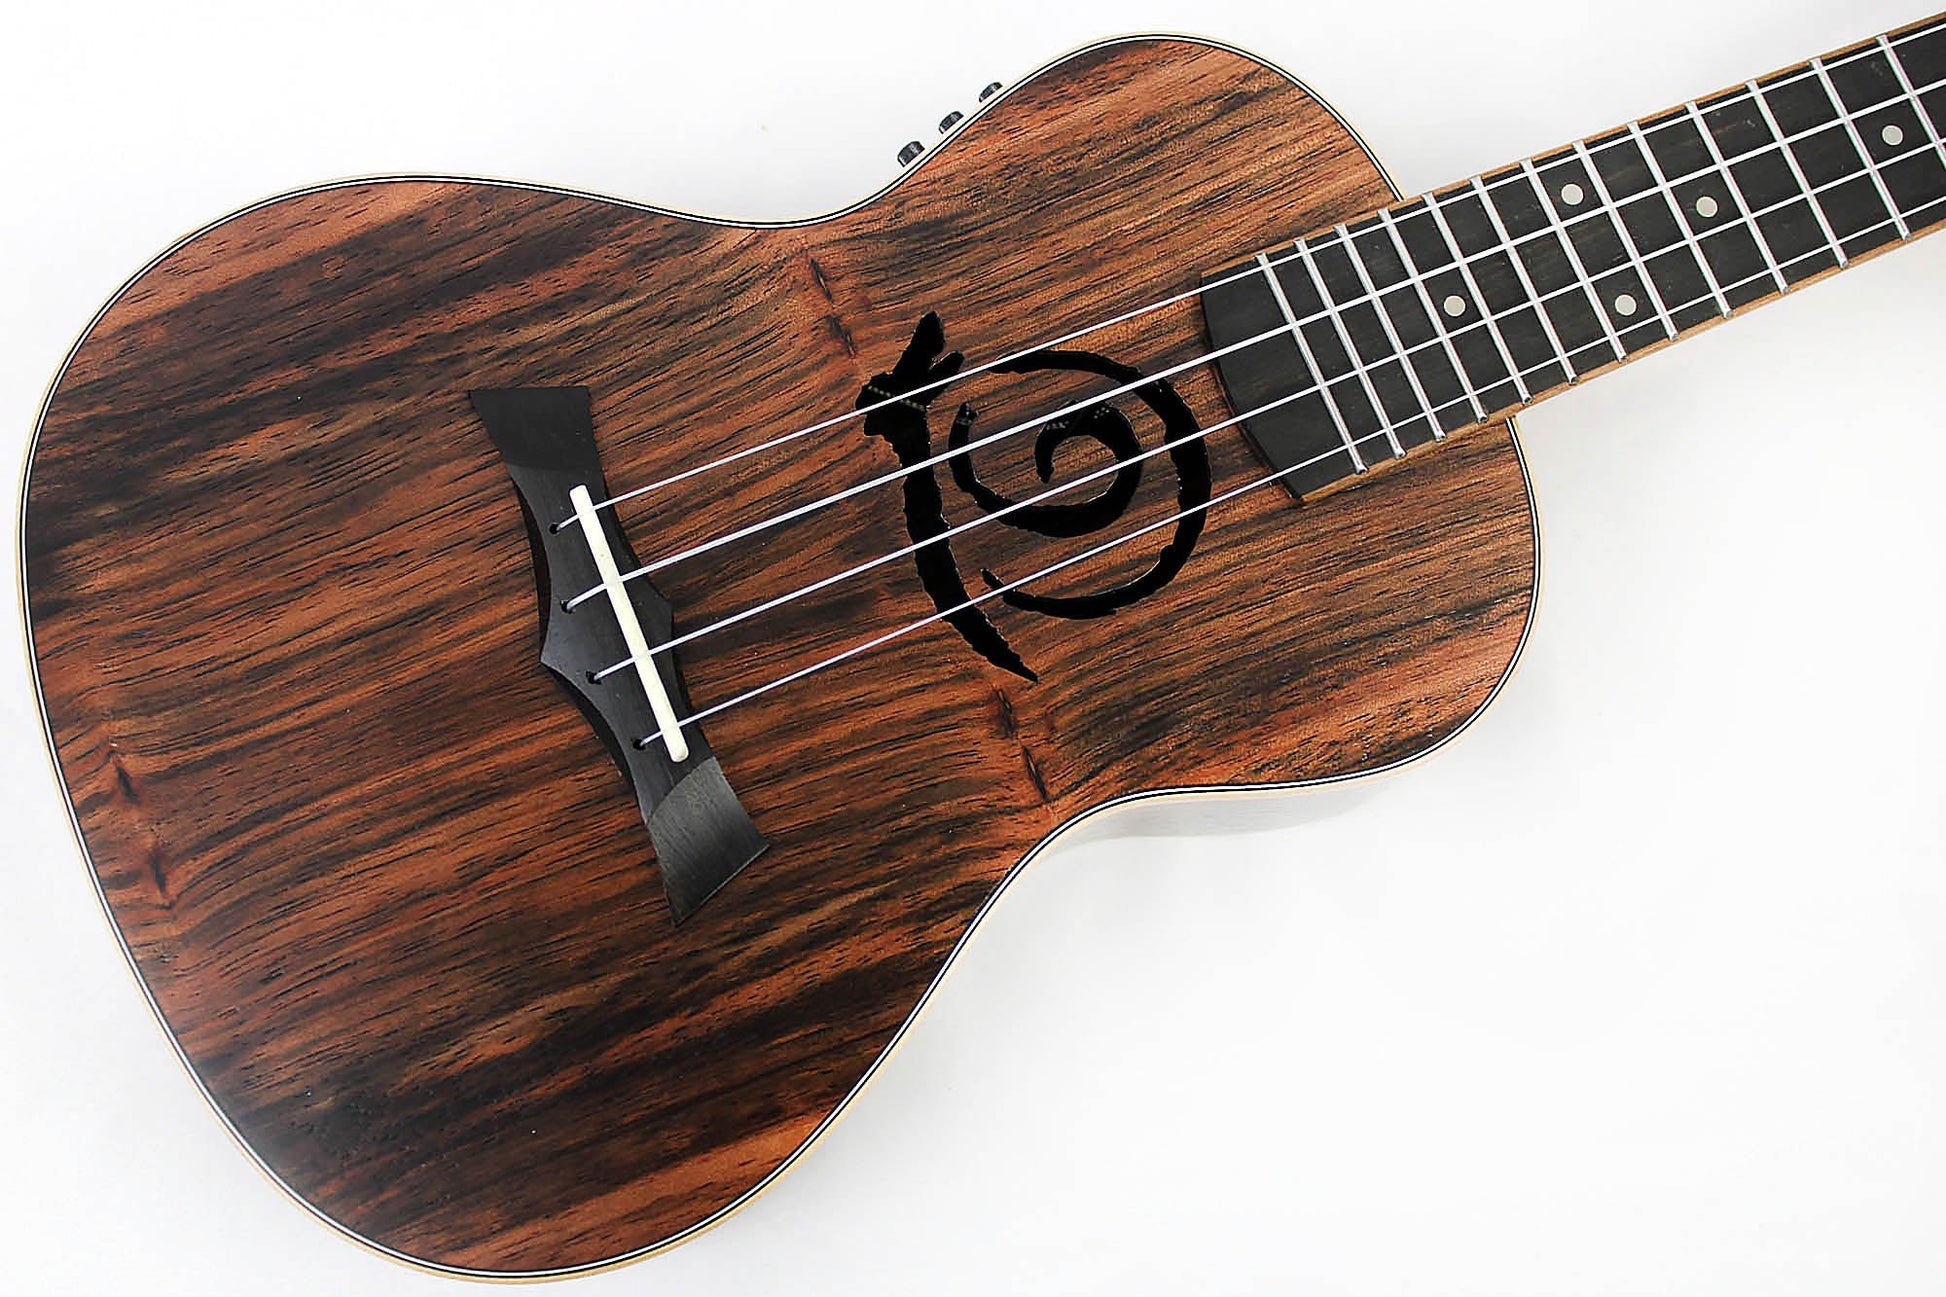 This is the front of the top and neck of a Snail SNAILEBUKEQ Ebony Ukulele Concert EQ.